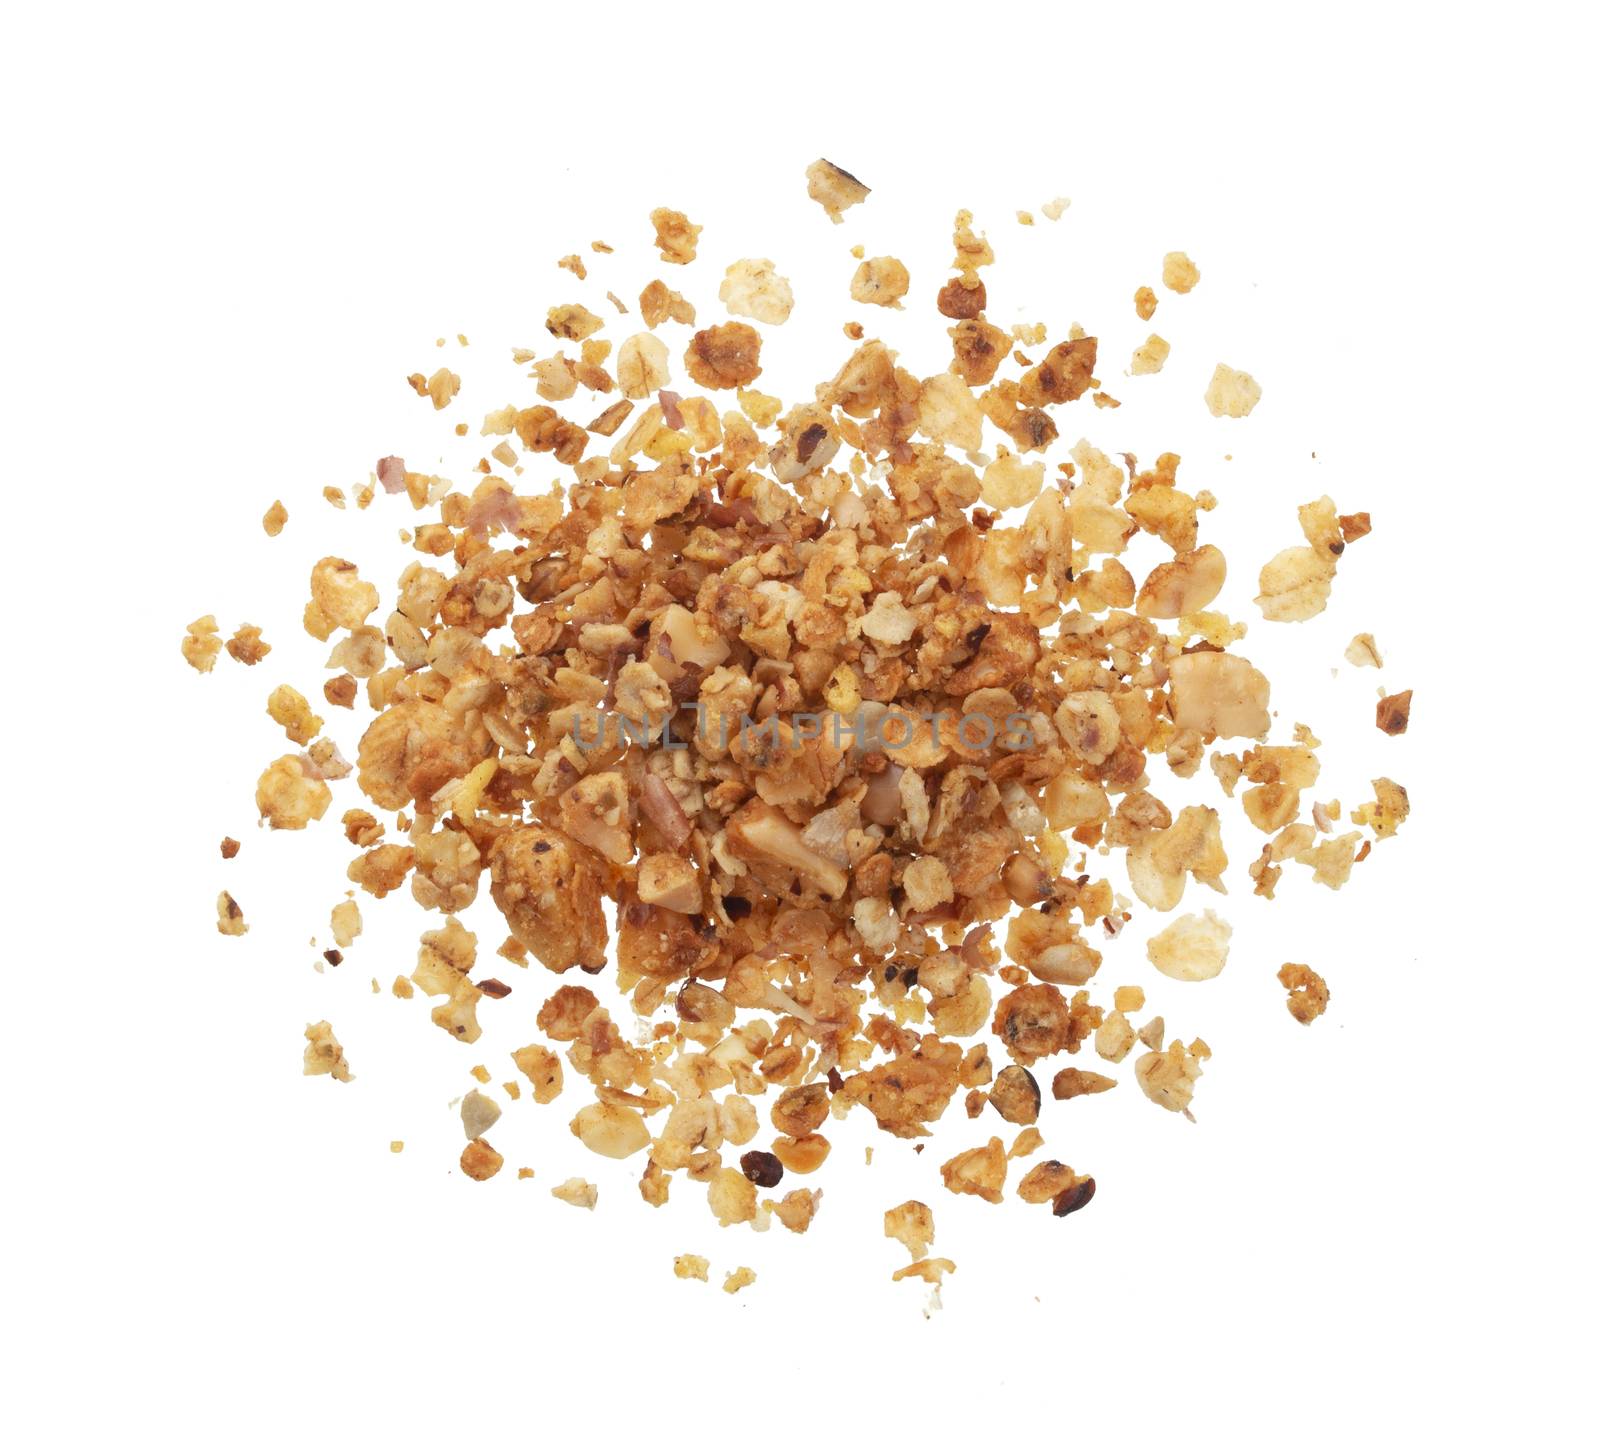 Pile of granola isolated on white background with clipping path, top view